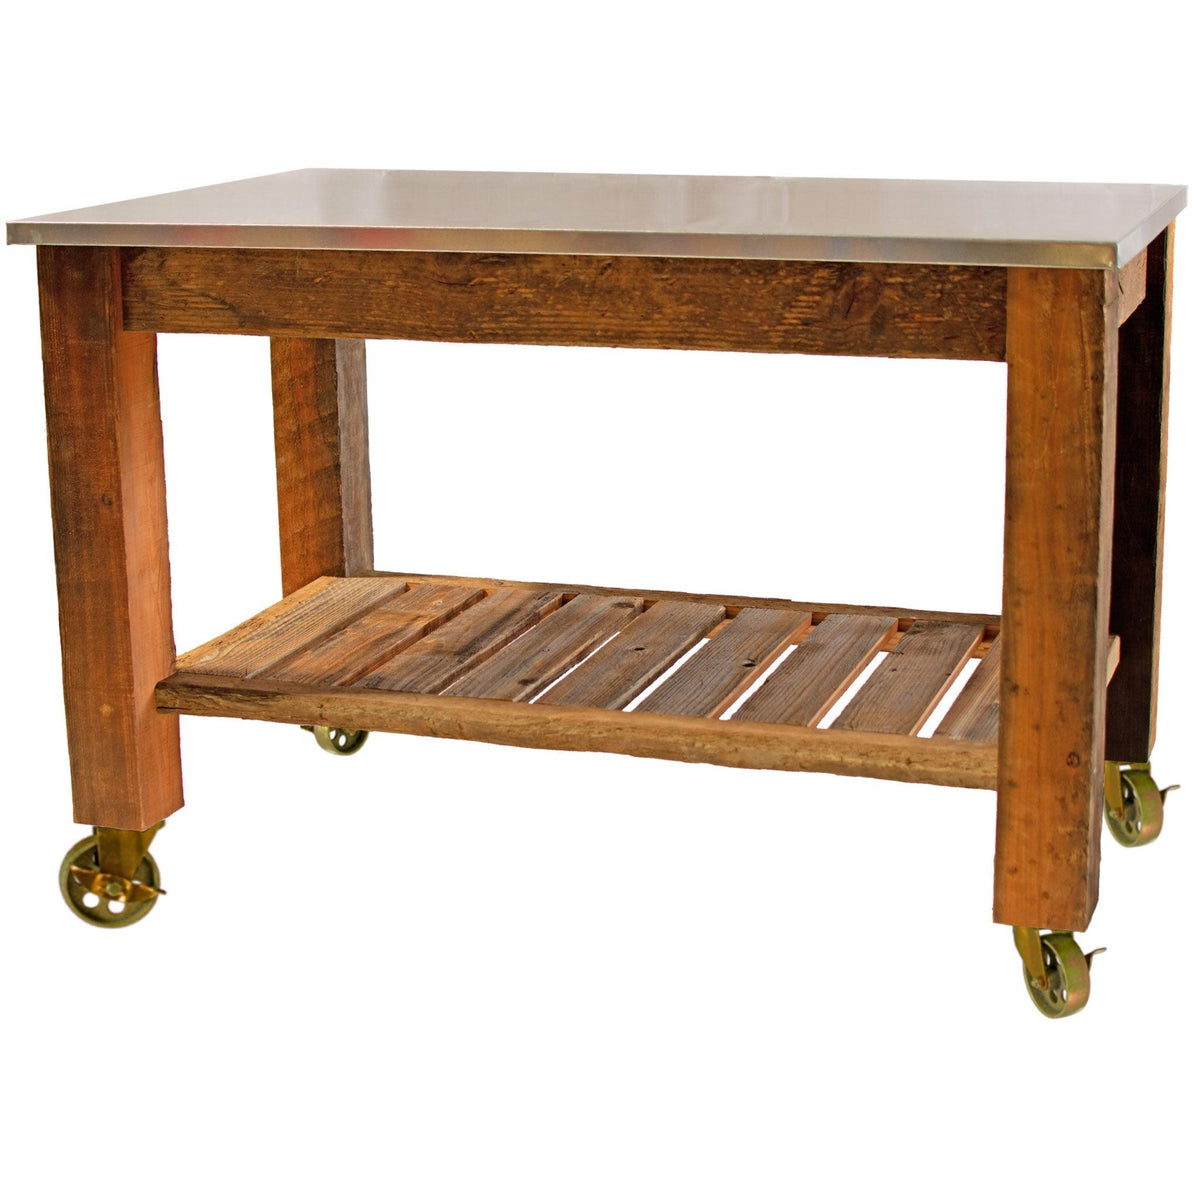 Lee Display's Redwood Potting Table Rolling Cart with 5in Gold Swivel Metal Casters and Hardware on sale now at leedisplay.com